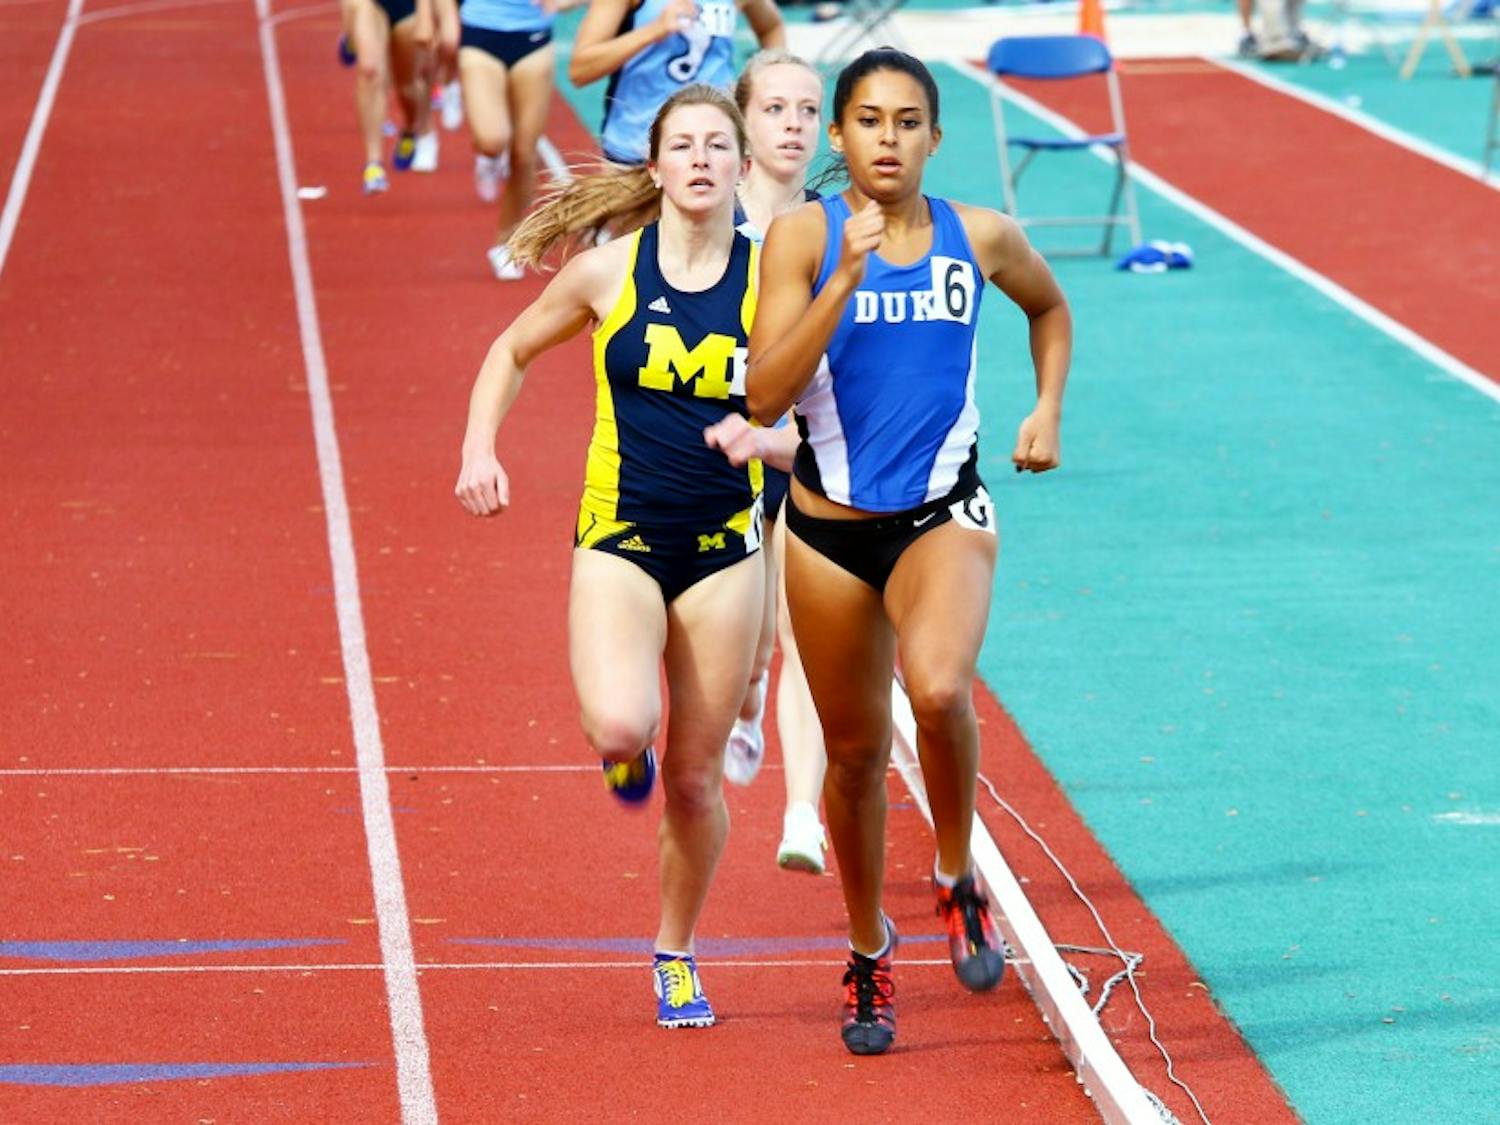 Senior Anima Banks traveled to California to&nbsp;run in the&nbsp;Payton Jordan Invitational while many of her teammates competed in the Penn Relays&nbsp;and set an outdoor personal-best of 2:04.38.